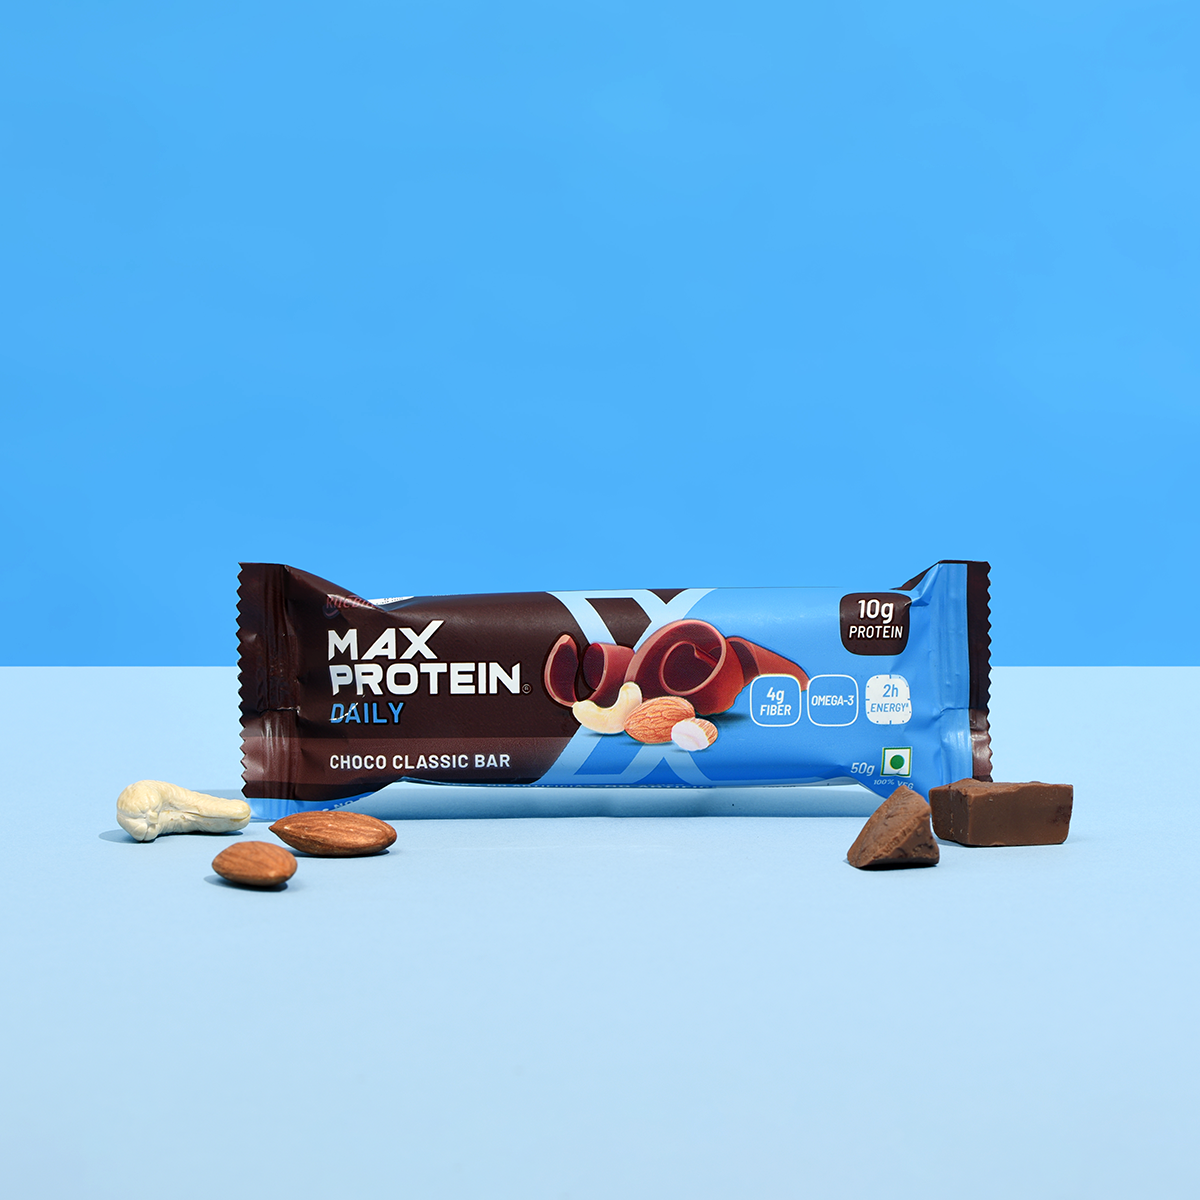 Max Protein Daily Choco Classic